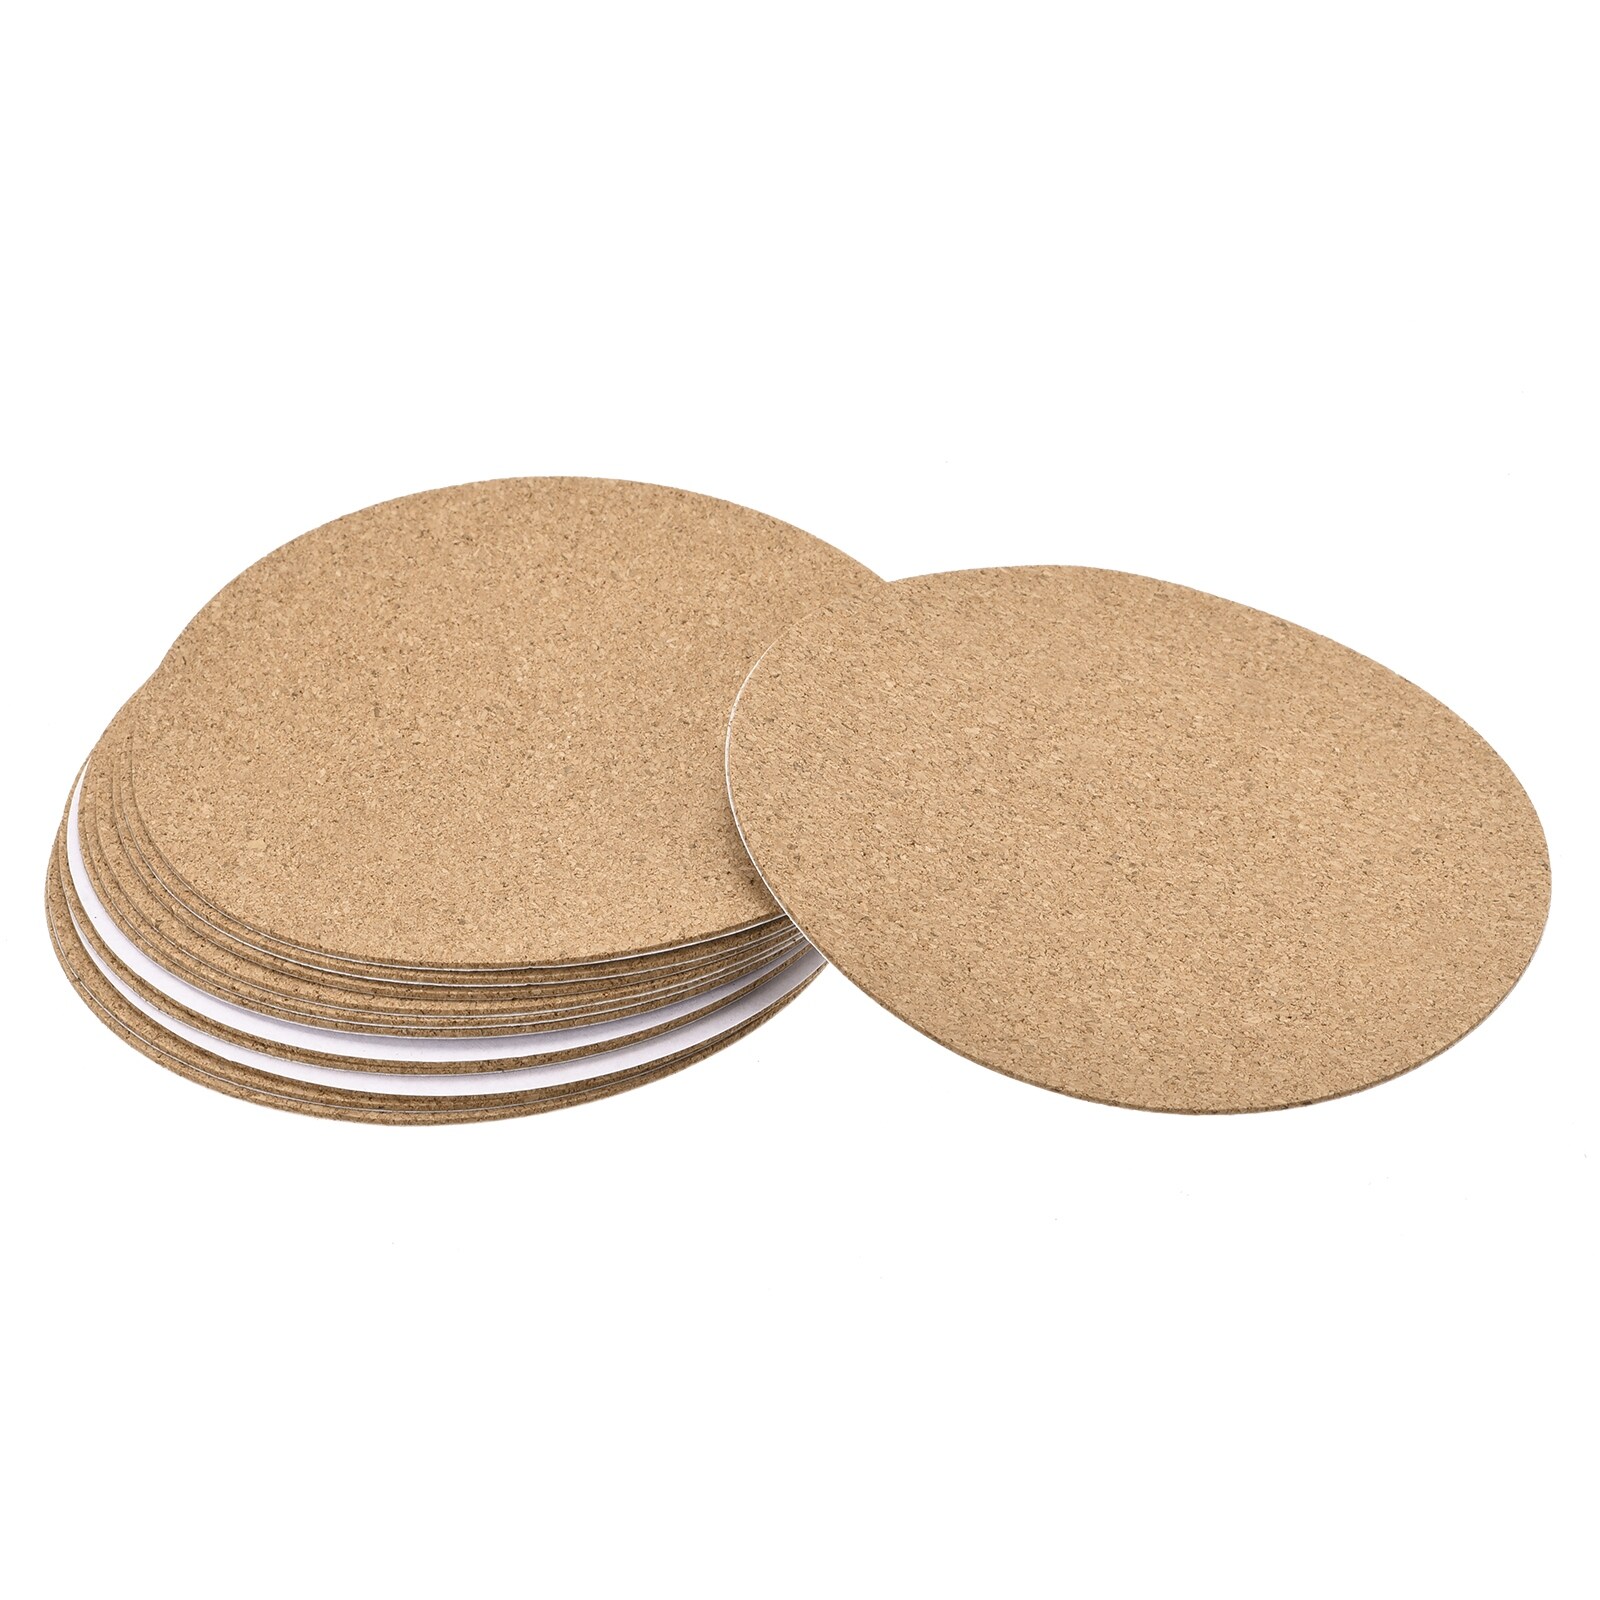 Round cork coasters 100mm - 6 stk. - Cork placemats and coasters - Experts  in cork products!